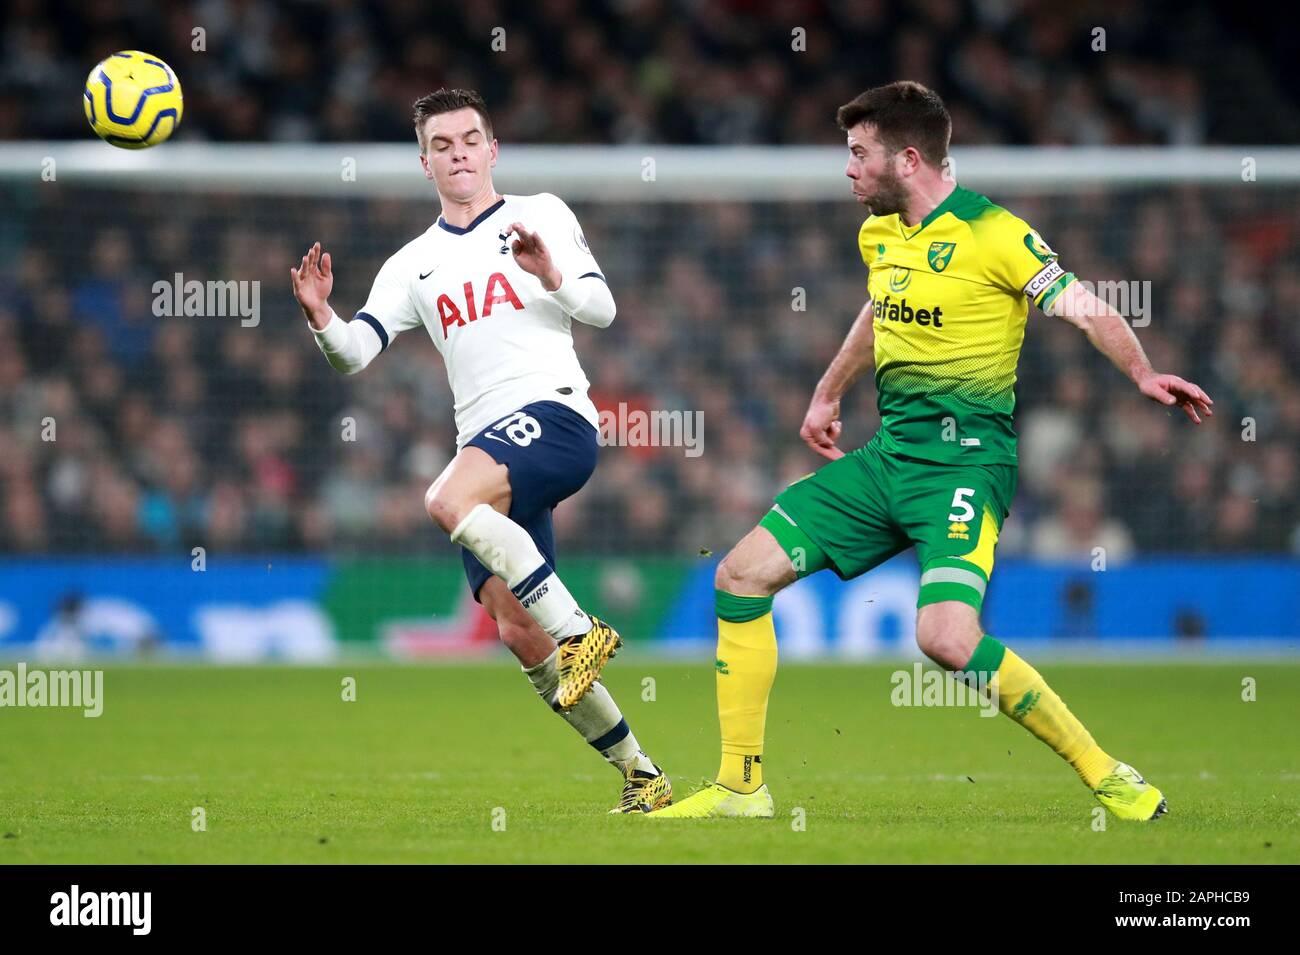 Tottenham Hotspur's Giovani Lo Celso (left) and Norwich City's Grant Hanley battle for the ball during the Premier League match at Tottenham Hotspur Stadium, London. Stock Photo